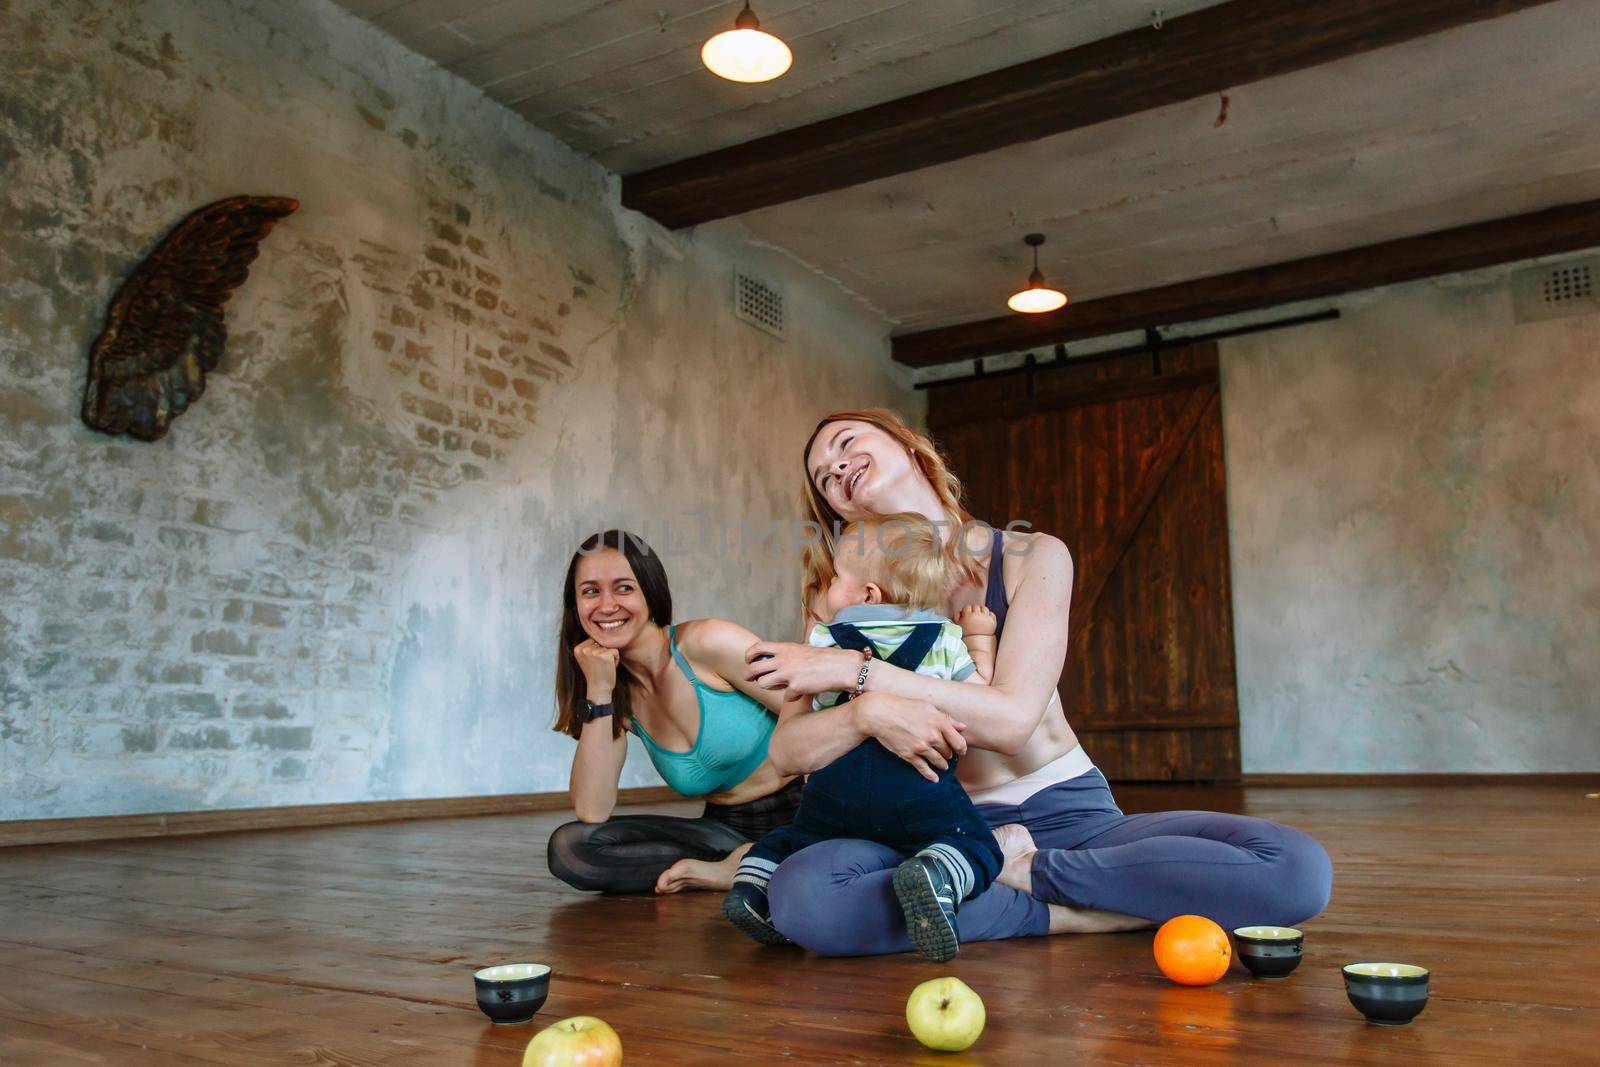 Conversation and tea with two yogis in the loft. A child playing next to the yogis by deandy